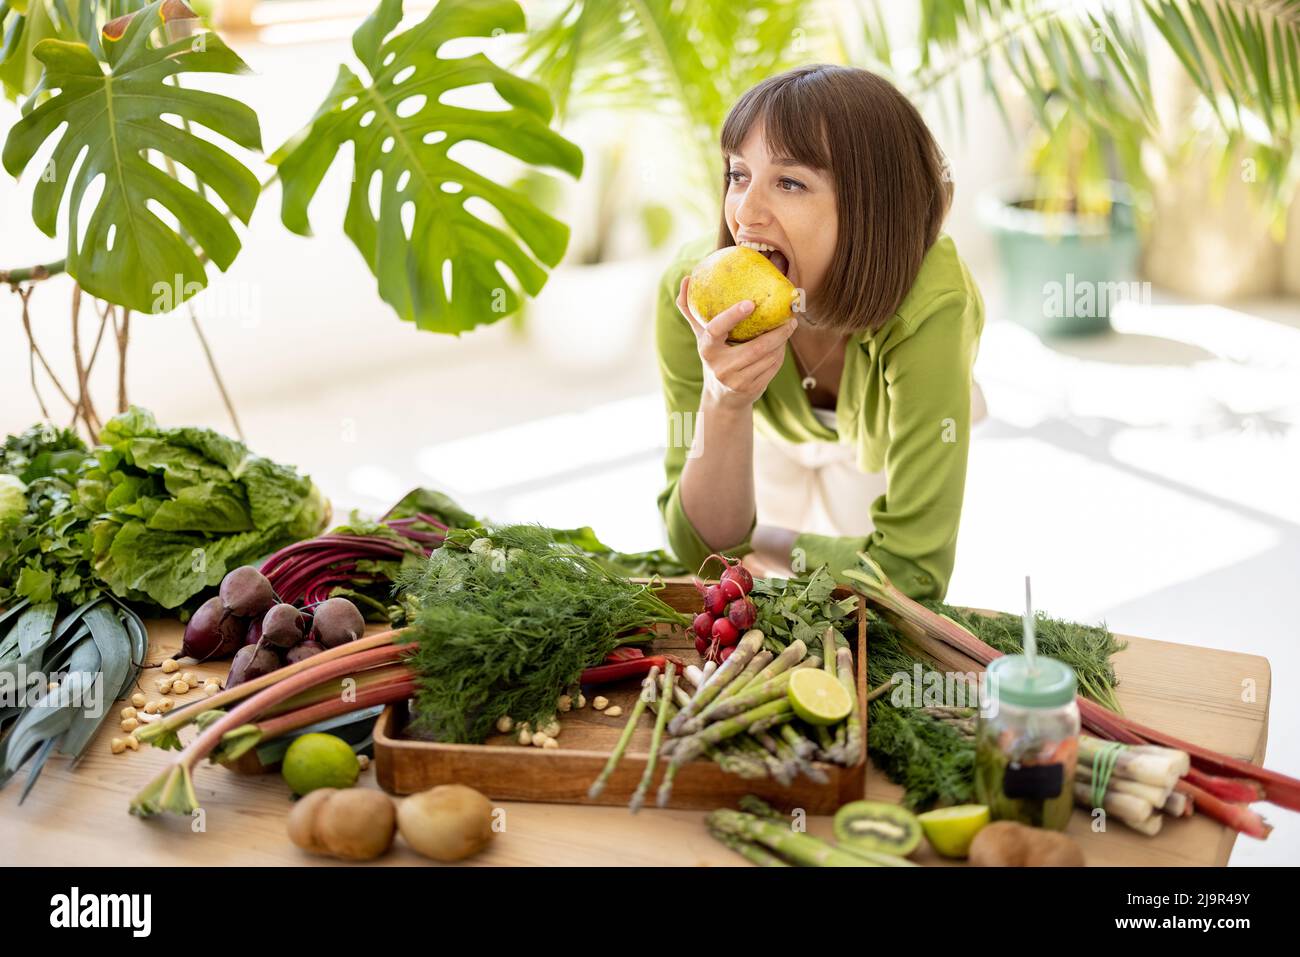 Woman with fresh healthy food ingredients indoors Stock Photo